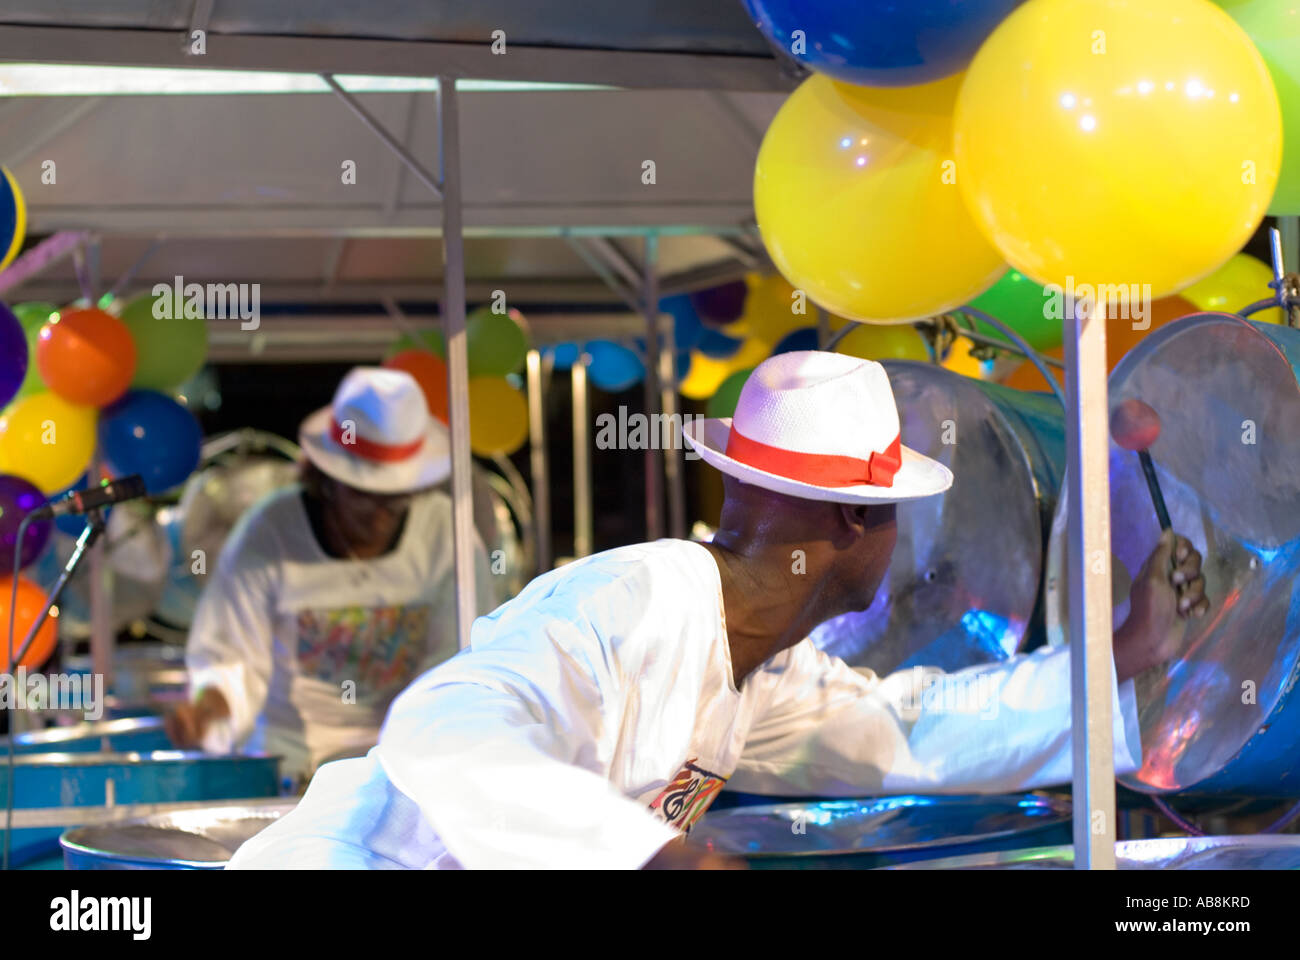 West Indies Trinidad Carnival Port of Spain Dimanche Gras Celebration Steel Pan Band Competion main stage Stock Photo